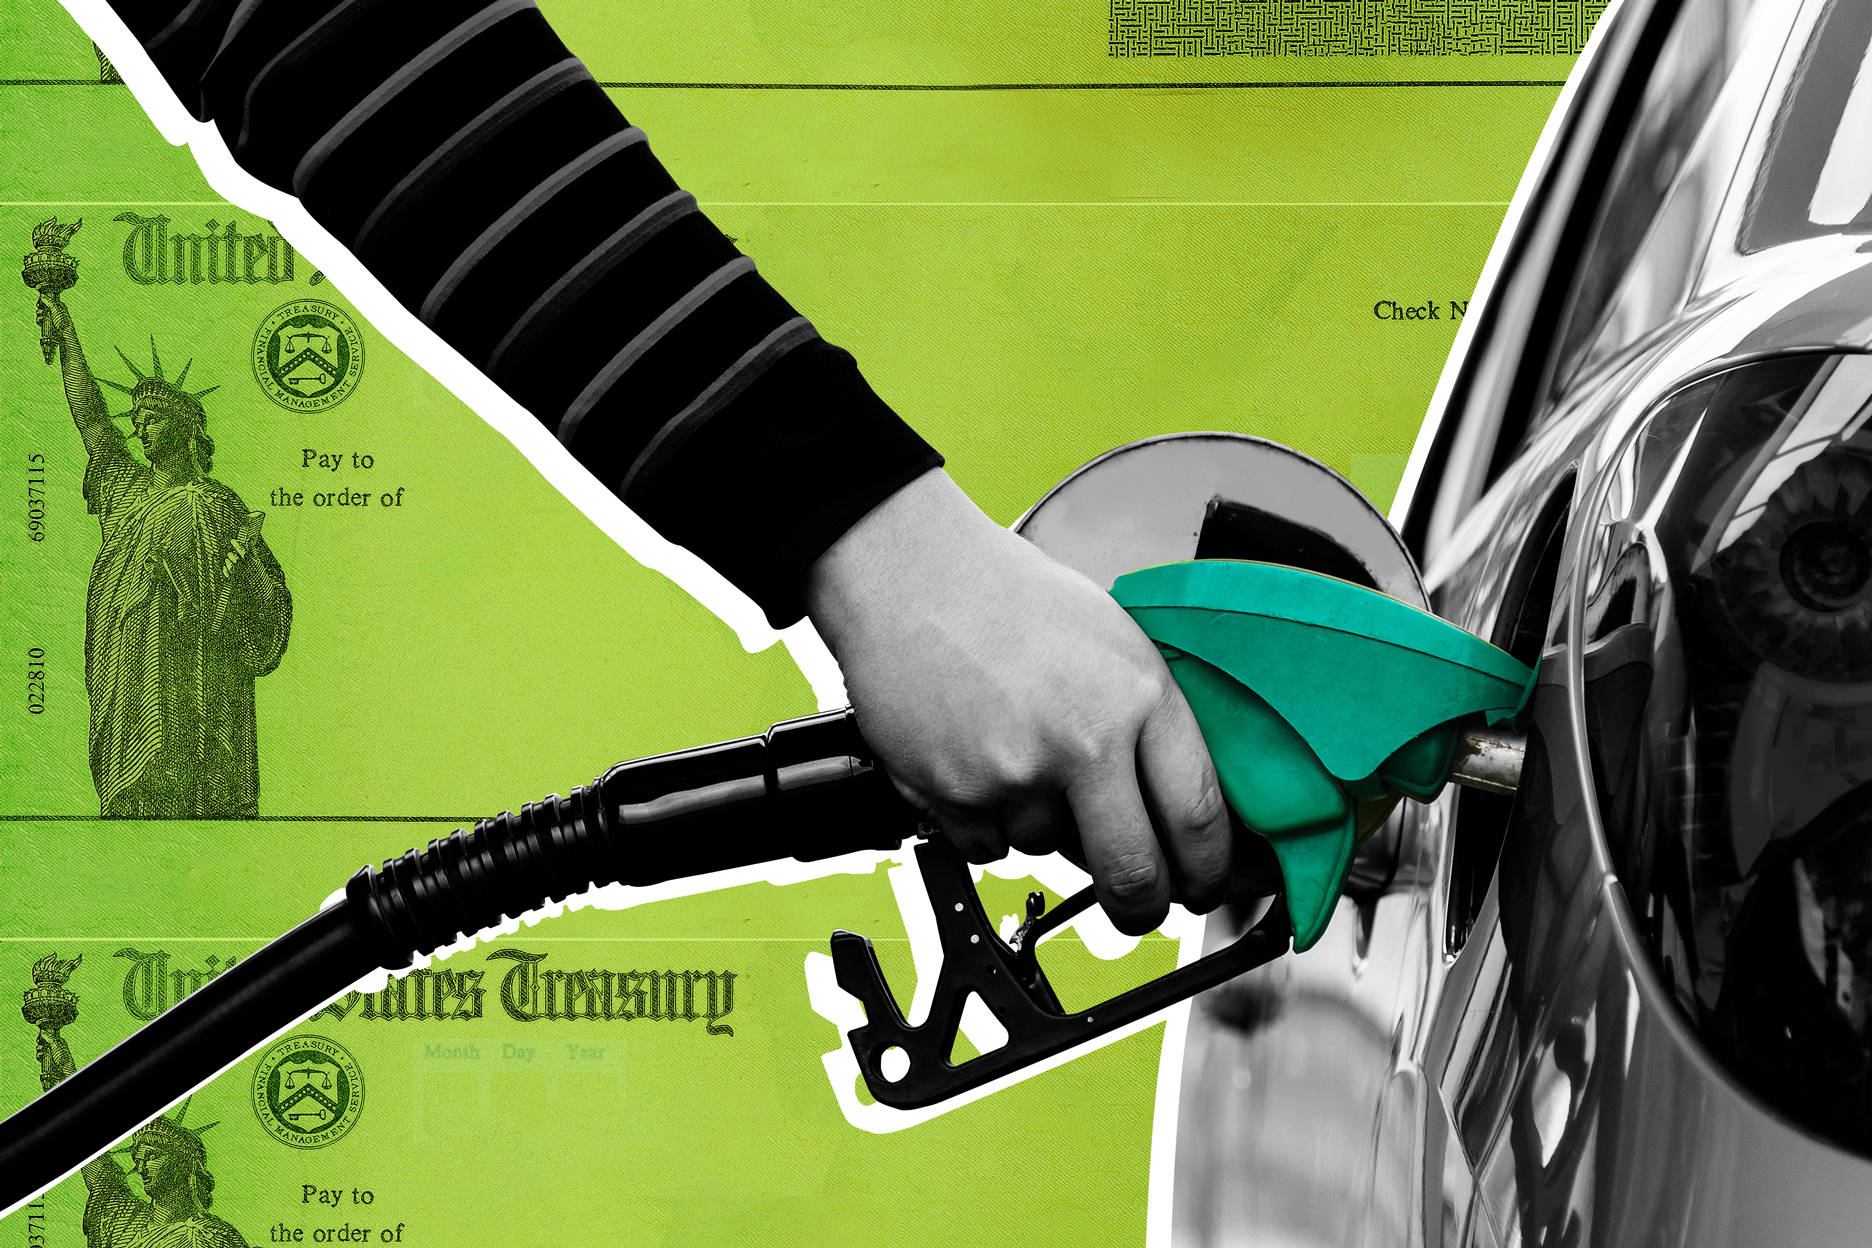 Stimulus Checks for High Gas Prices: Yes, It Might Happen